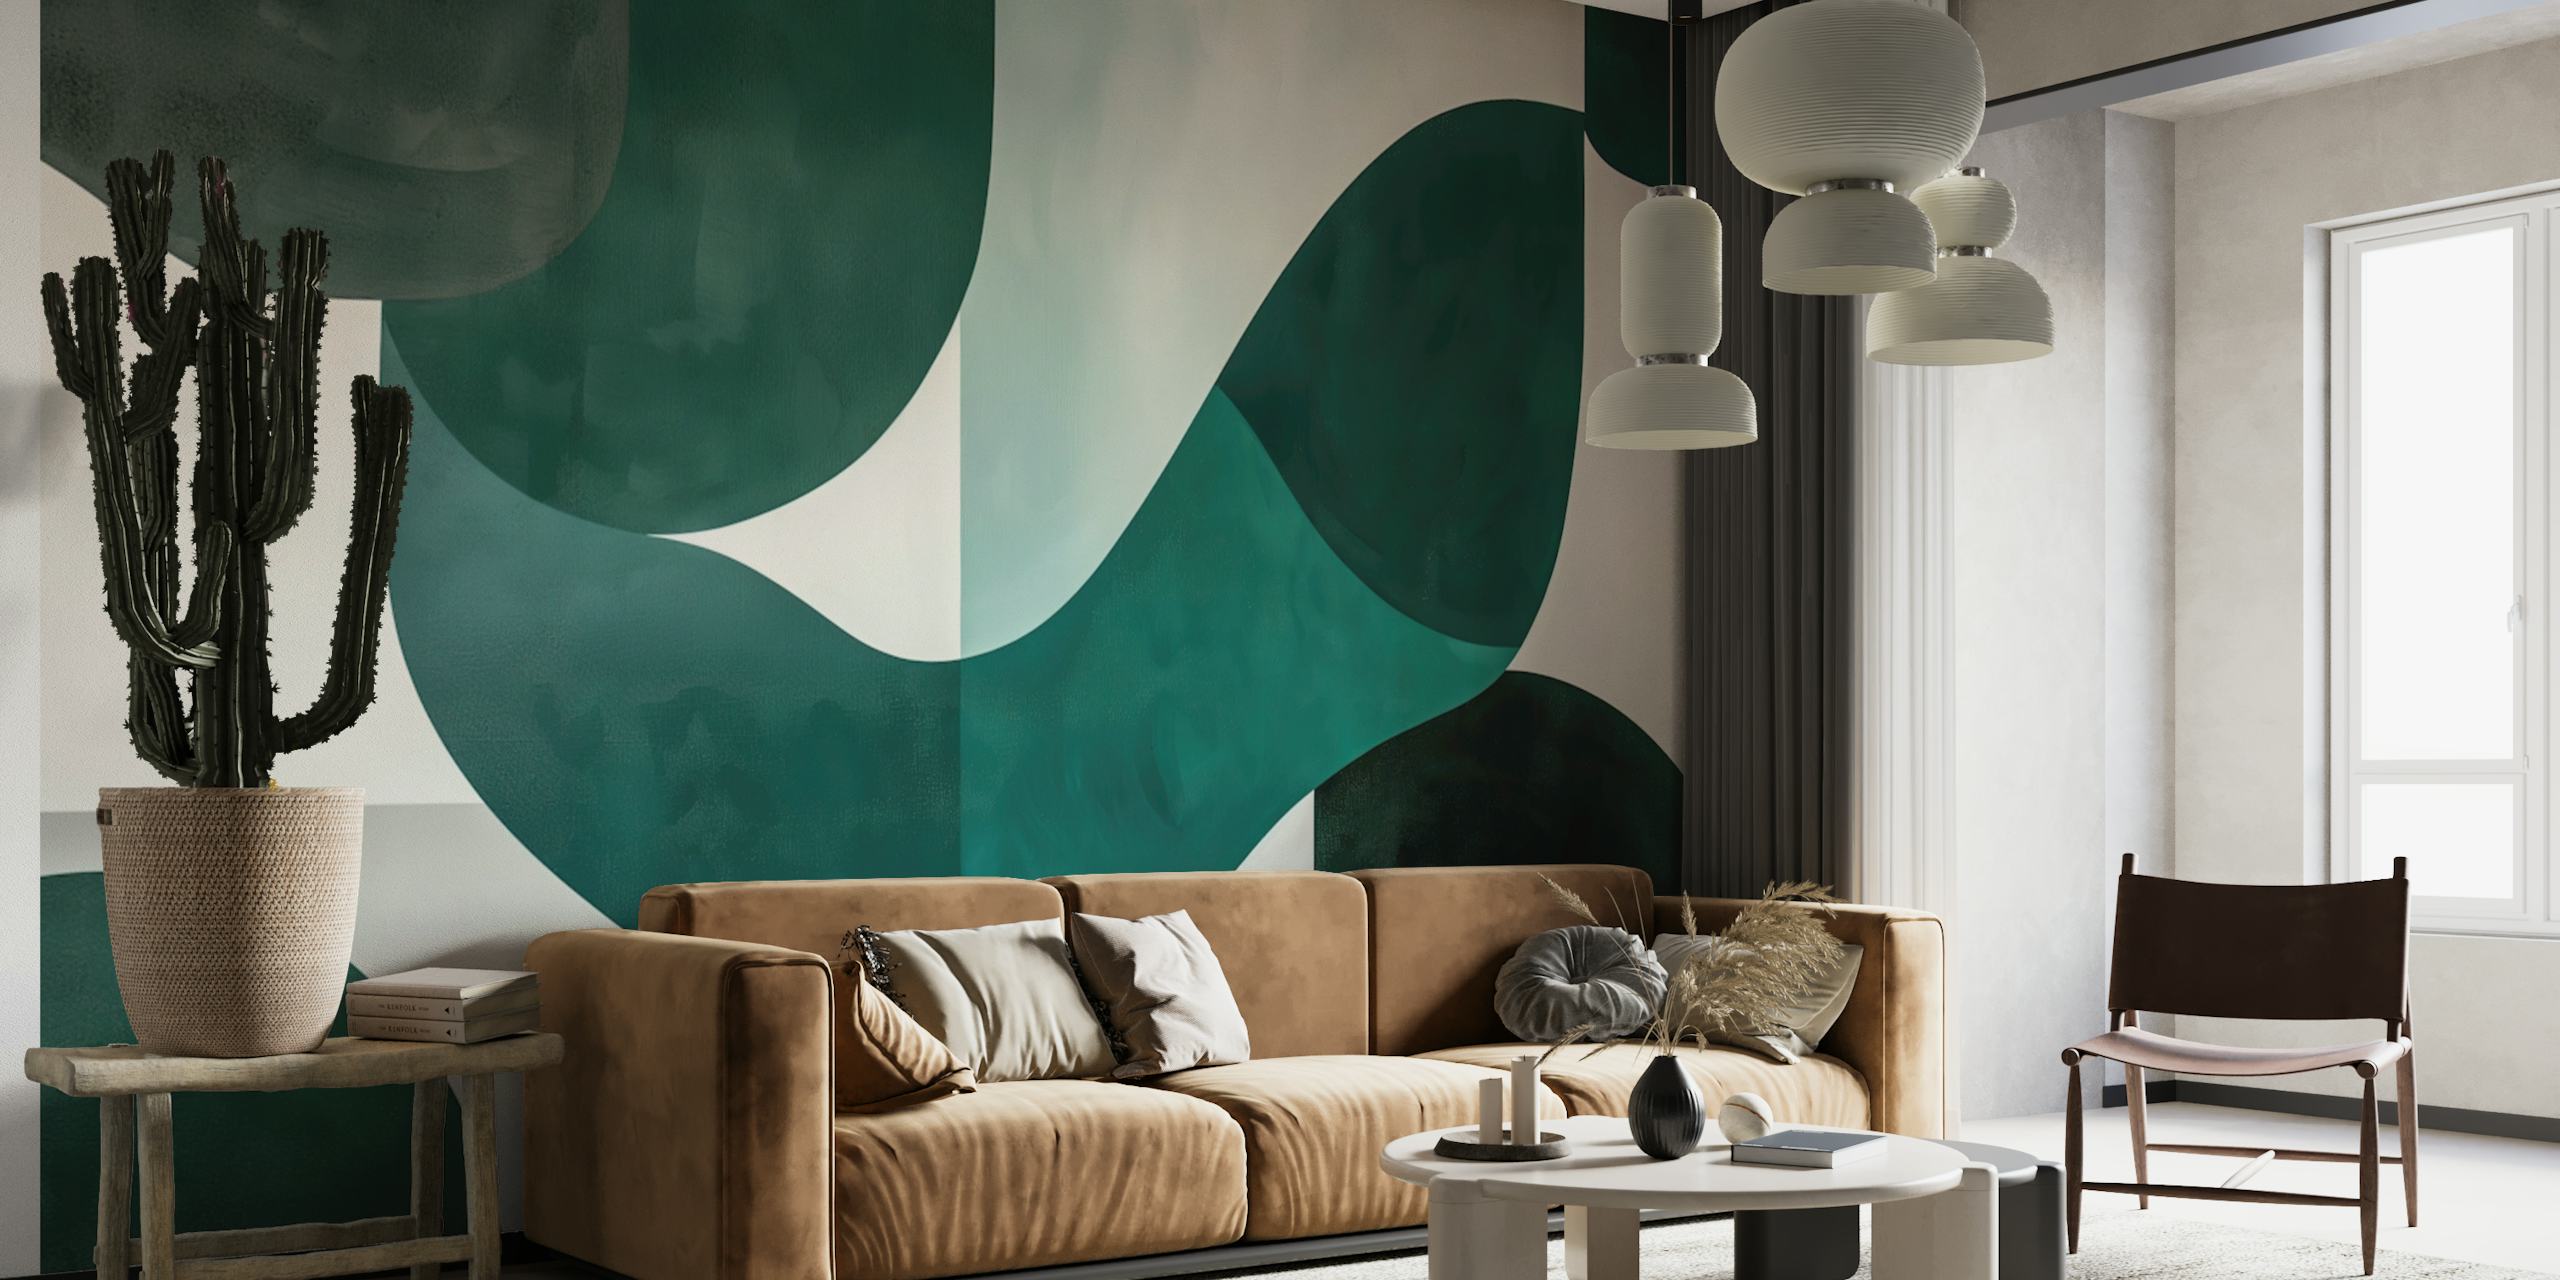 Abstract green wall mural in soothing shades with flowing shapes